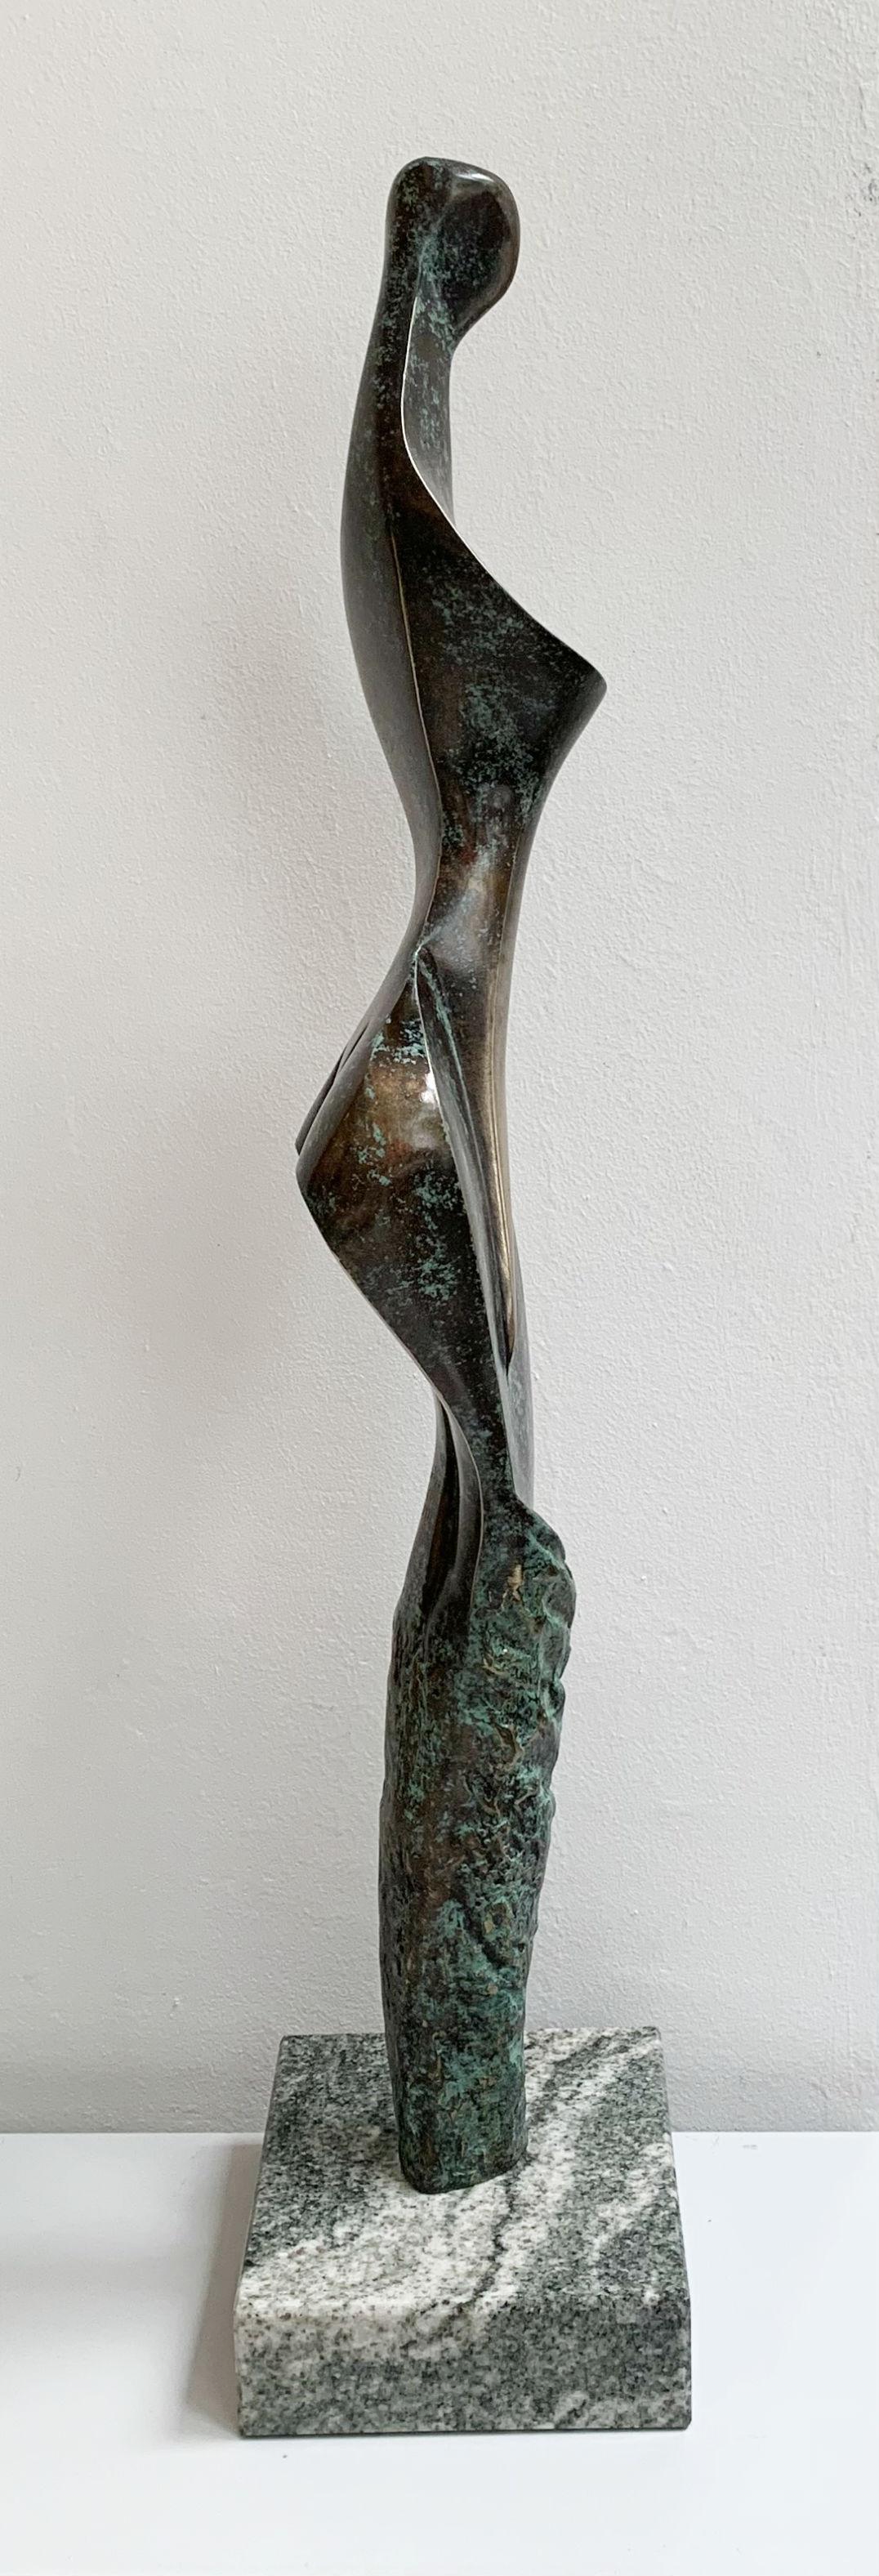 Venus - XXI century Contemporary bronze sculpture, Abstract & figurative - Gold Abstract Sculpture by Stanisław Wysocki